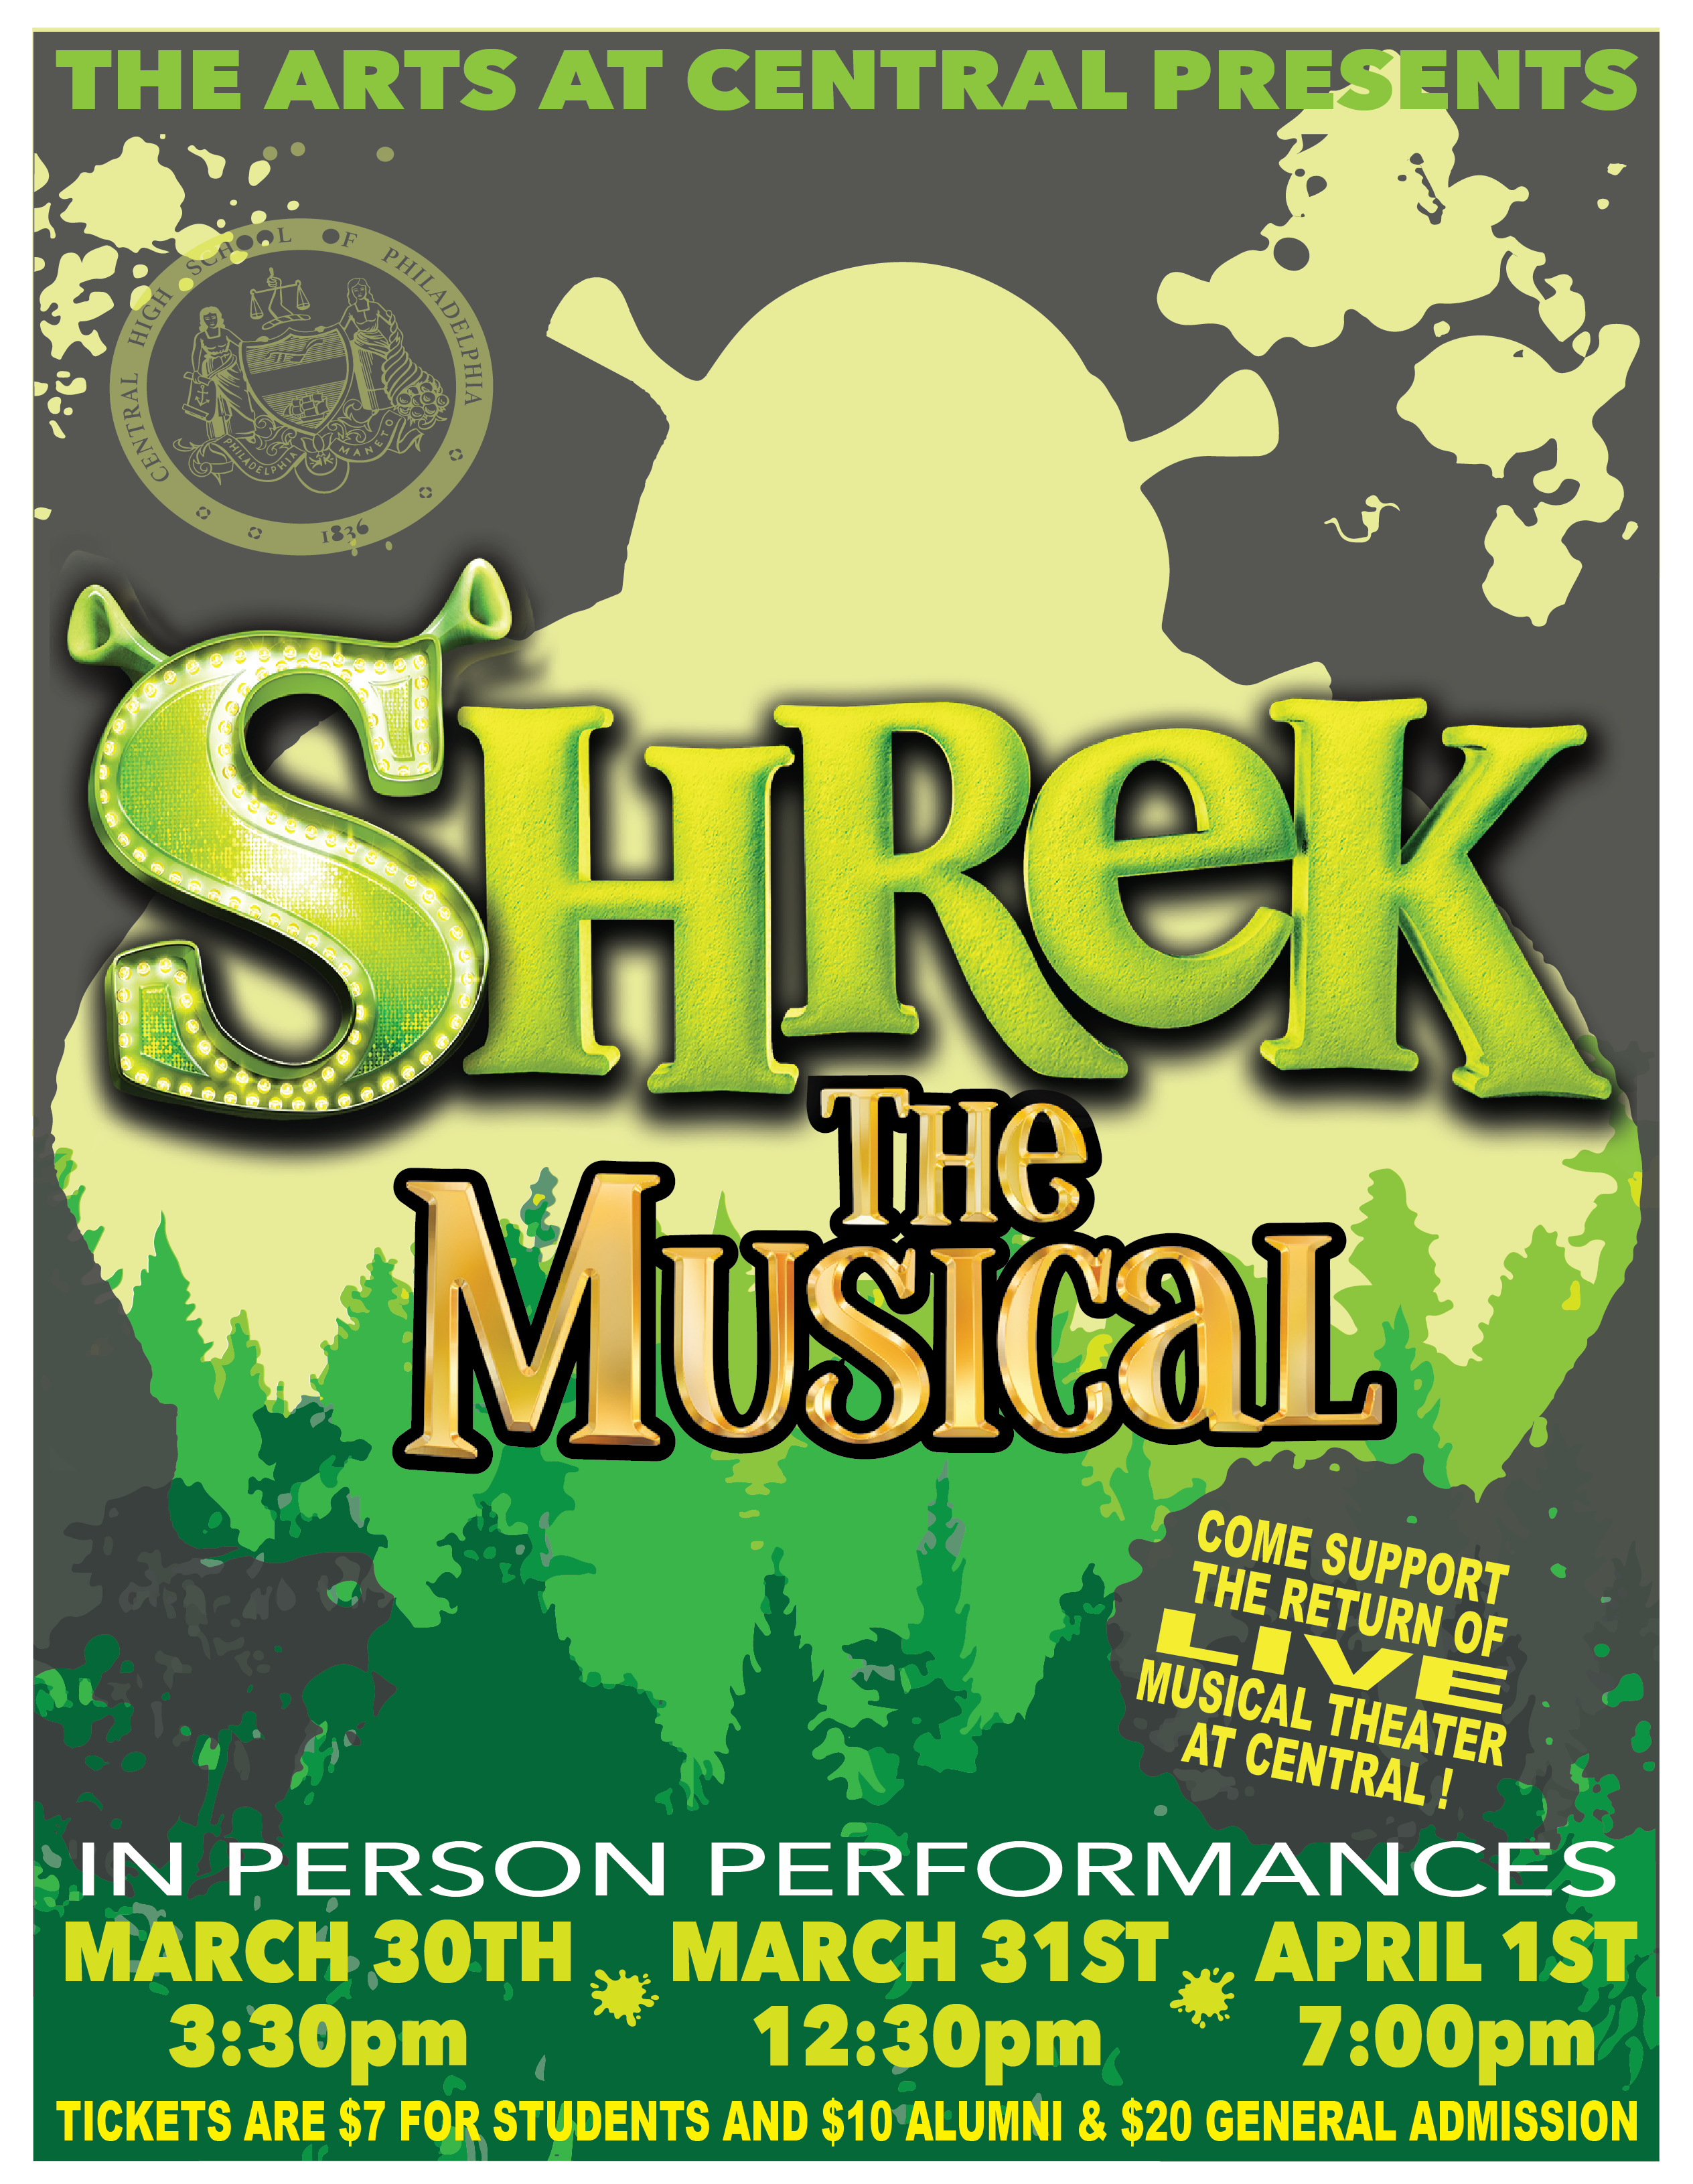 In person performances: March 30,2022: 3:30 PM March 31, 2022: 12:30 PM April 1, 2022: 7:00 PM TICKETS AT THE DOOR: Students: $7.00 Alumni: $10.00 General: $20.00